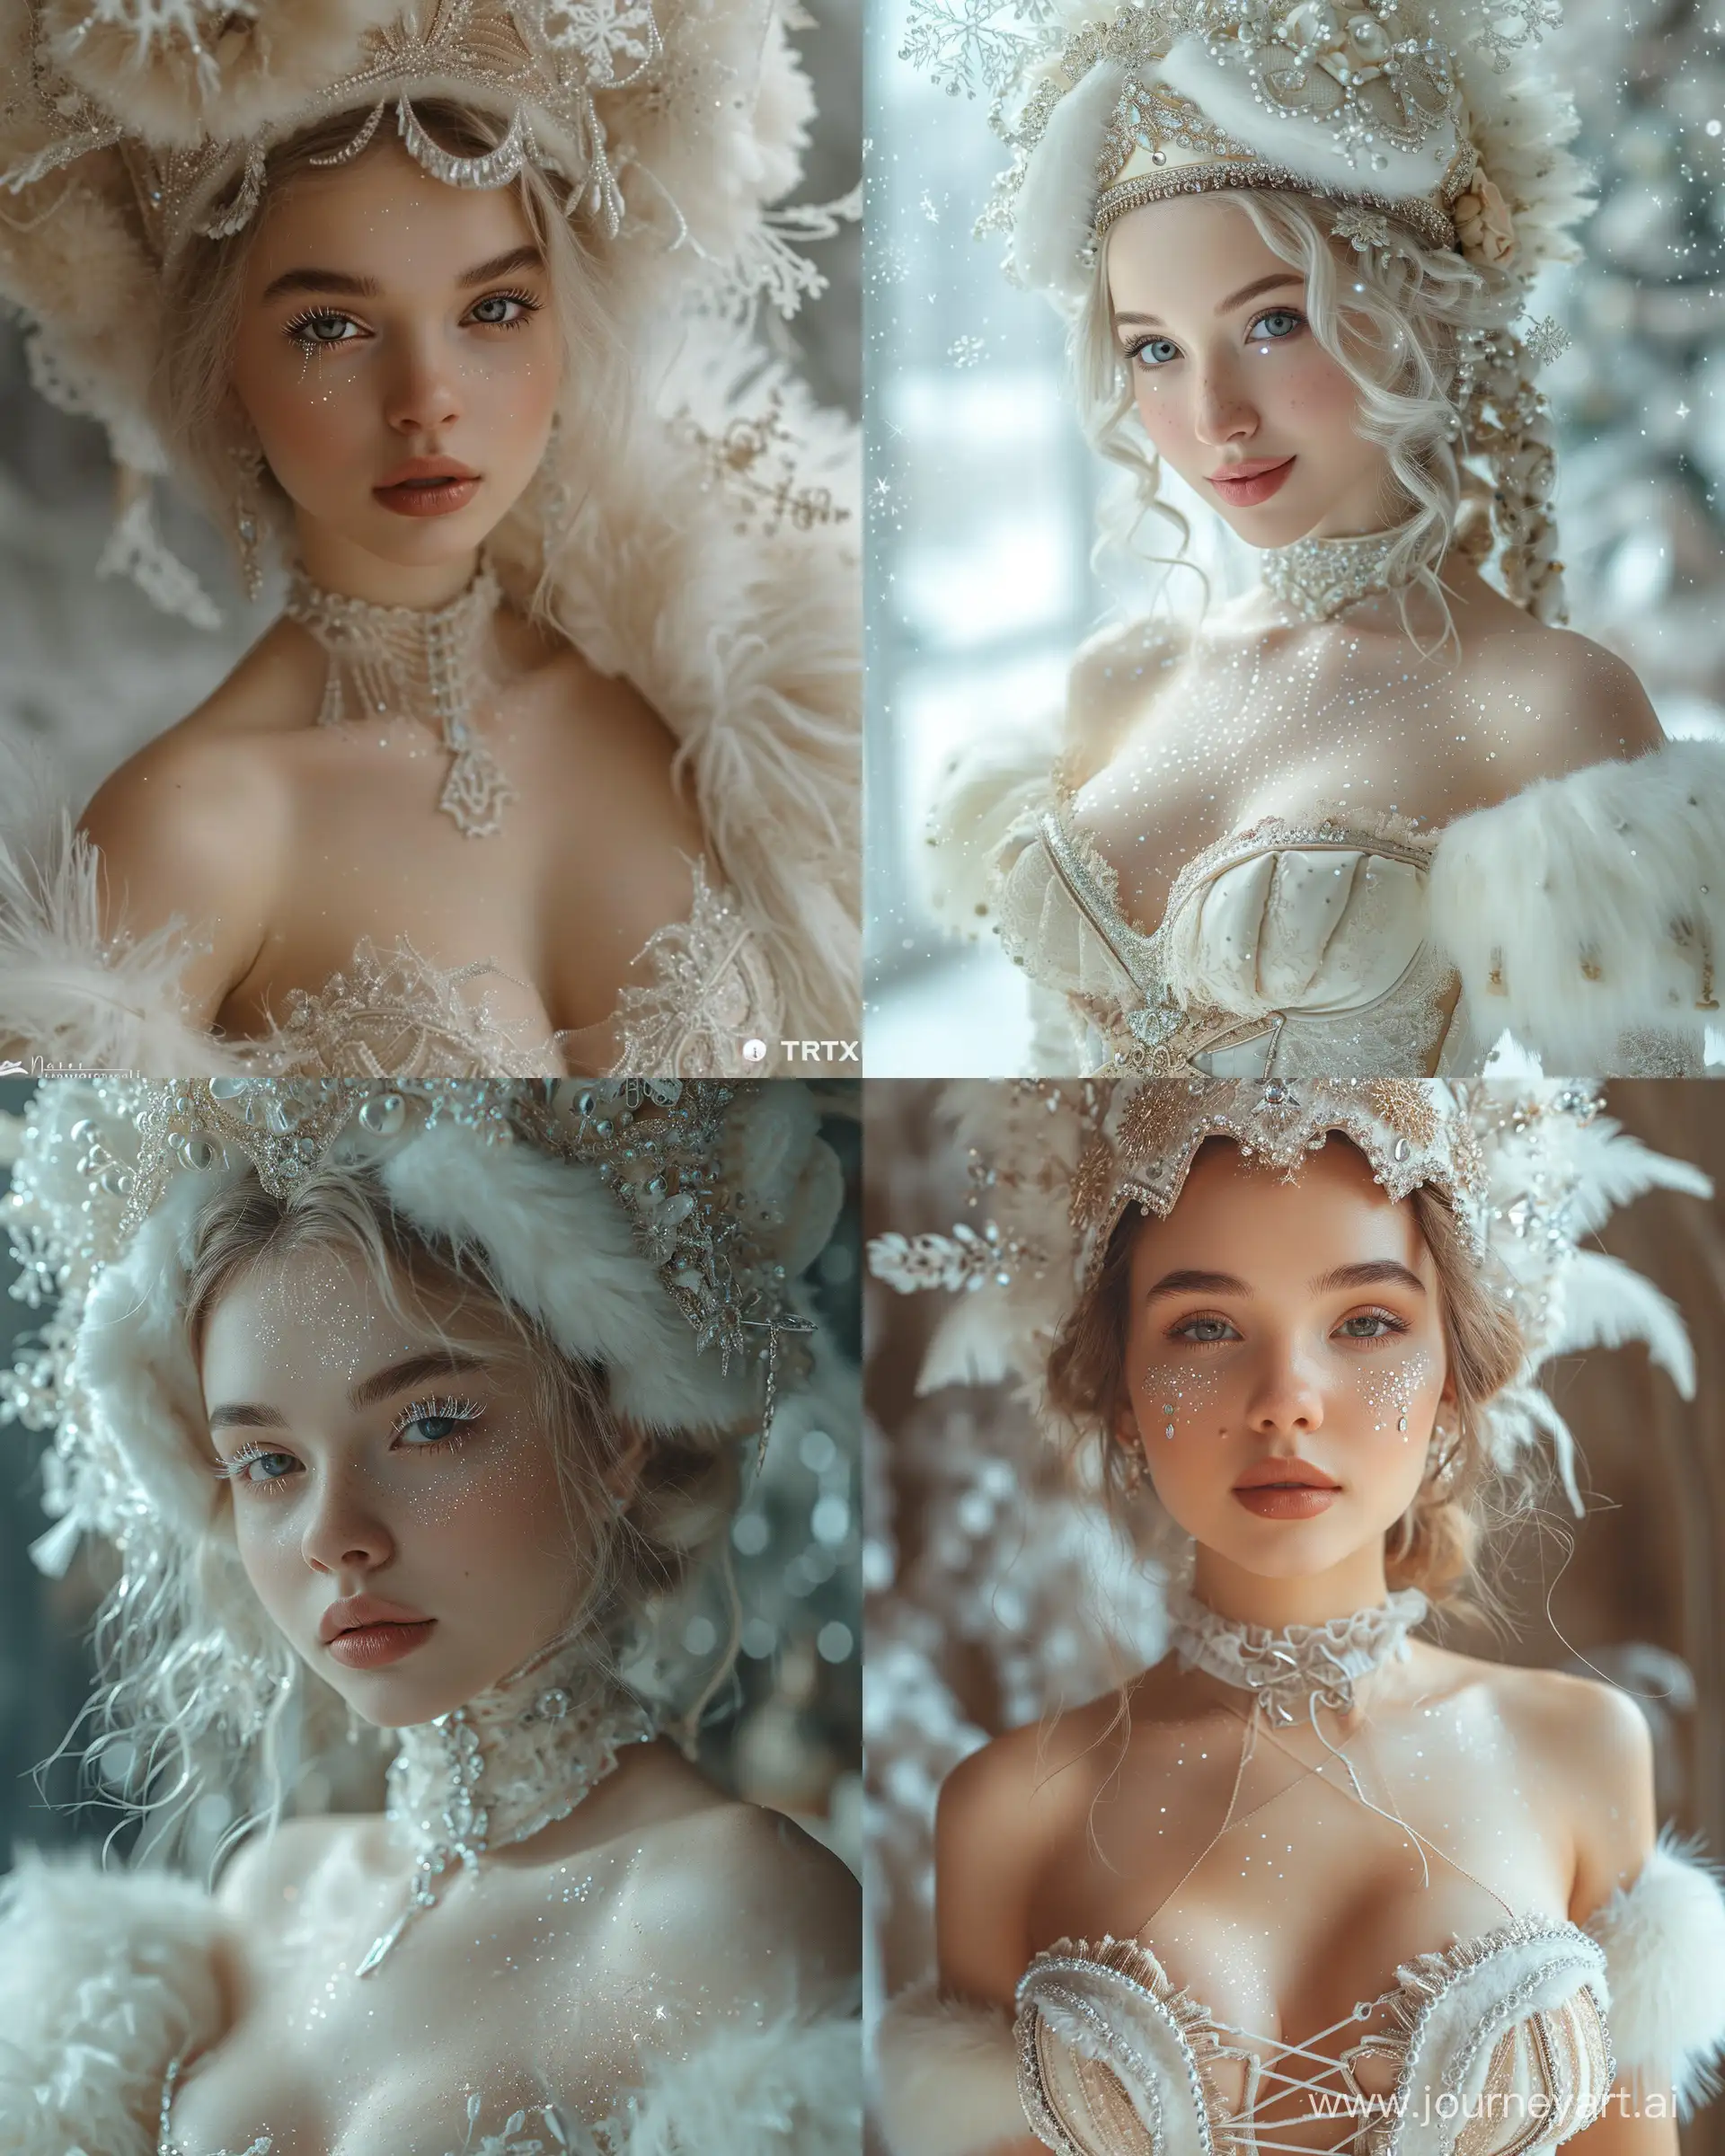 Charming-Snow-Princess-with-Frosty-Elegance-and-Glamorous-PinUps